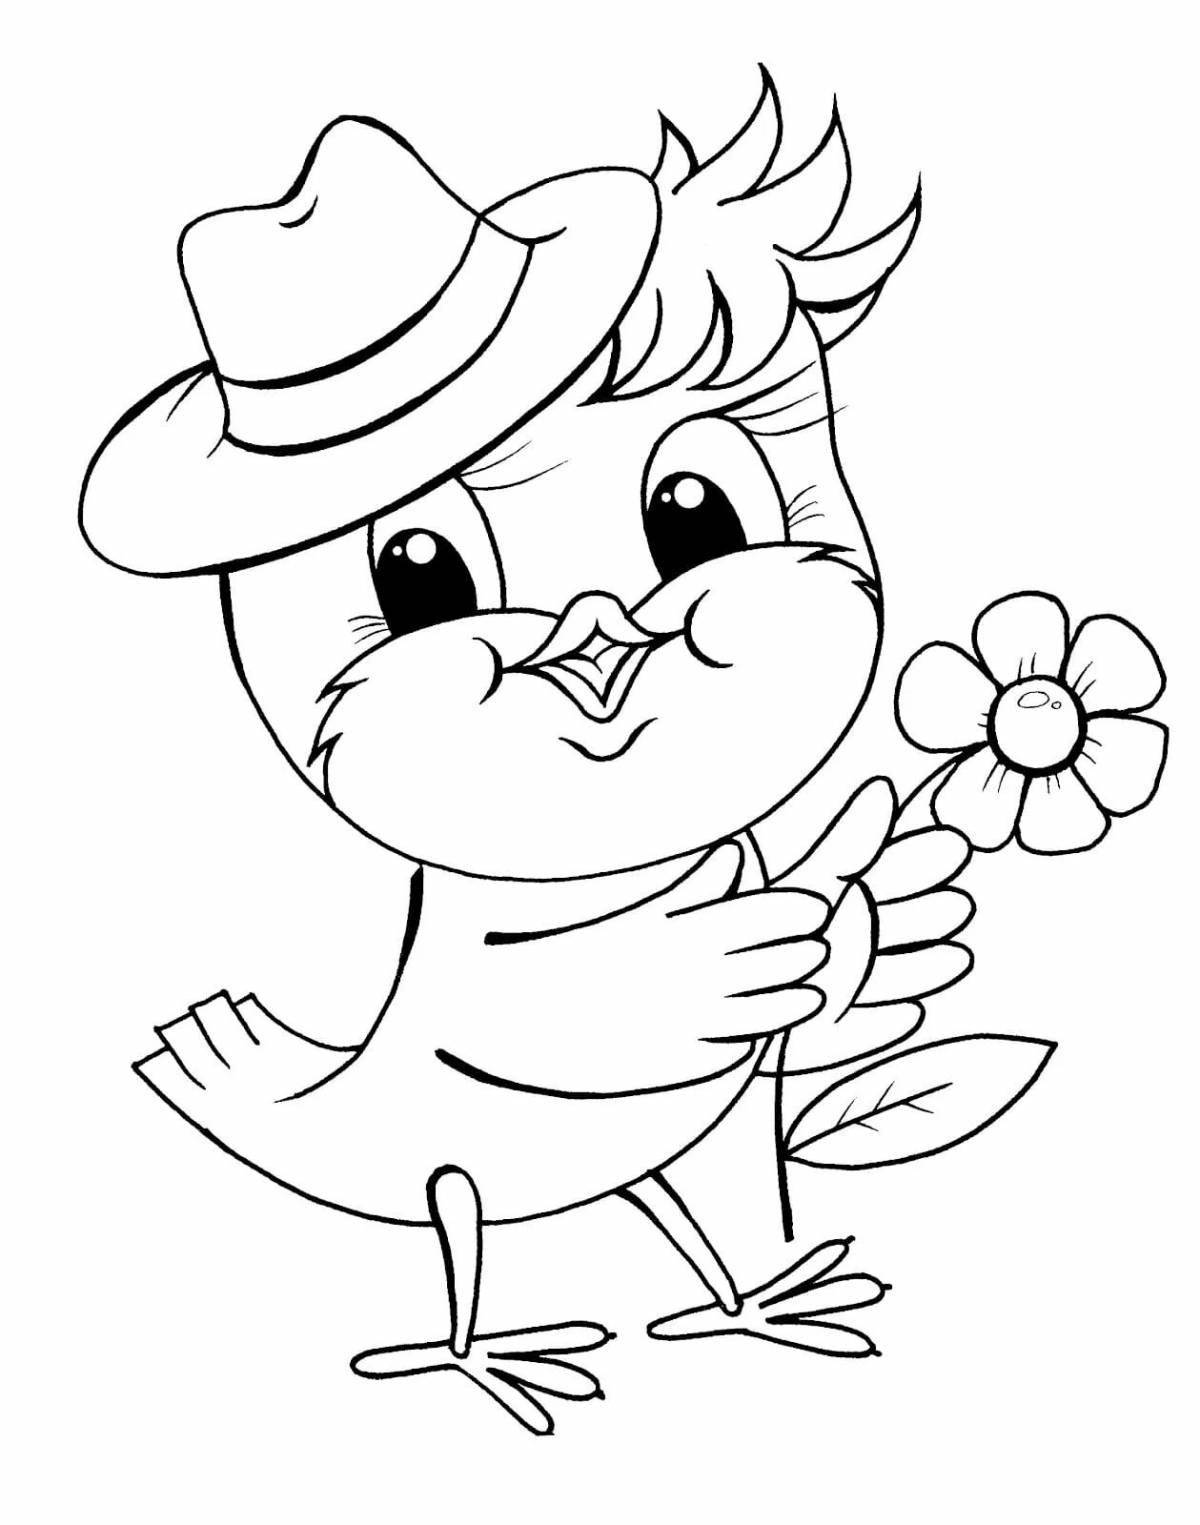 Adorable coloring book for kids 5